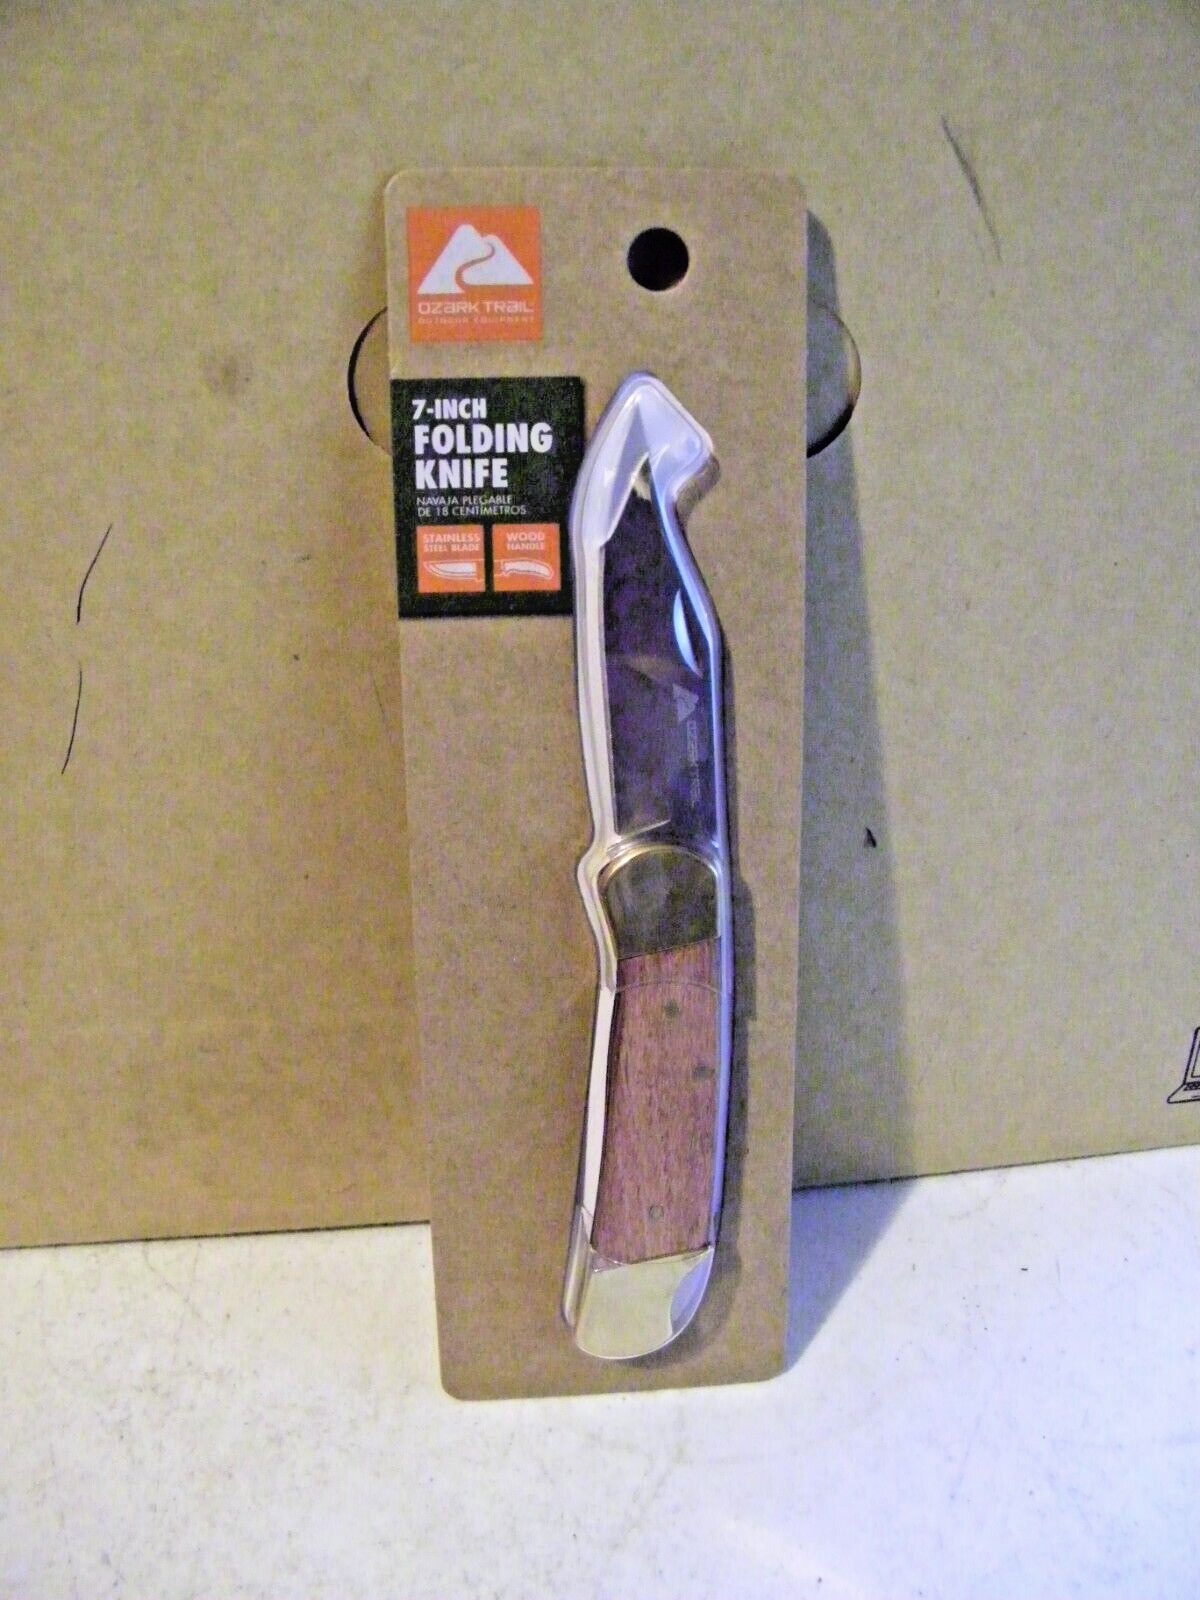 New Ozark Trail 7 Inch Folding Stainless Steel Knife Wood Handle Pocket Clip